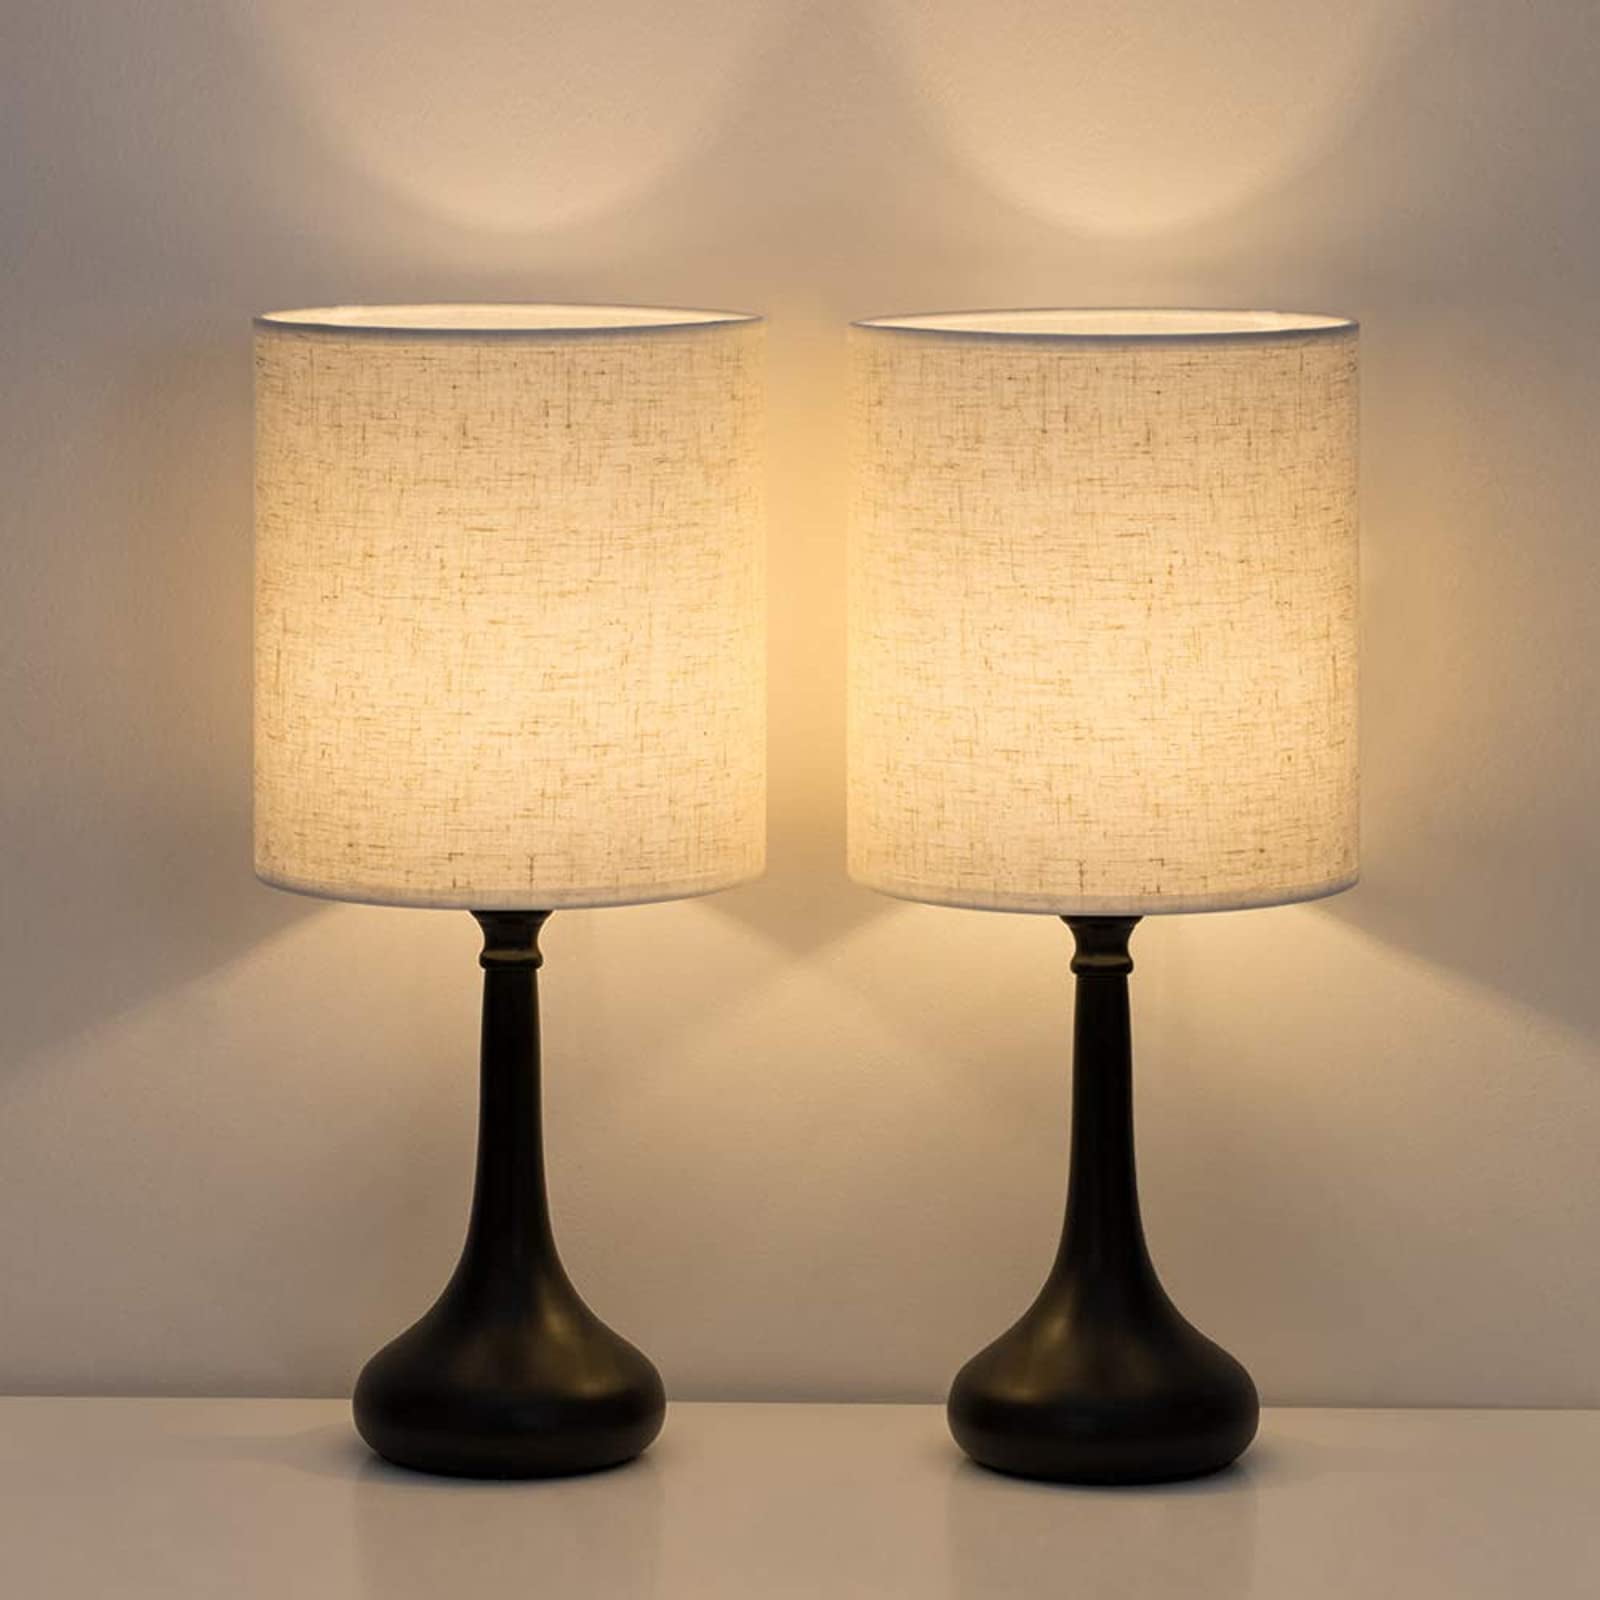 HAITRAL Bedside Table Lamps Set of 2 - Modern Nightstand Lamps, Simple